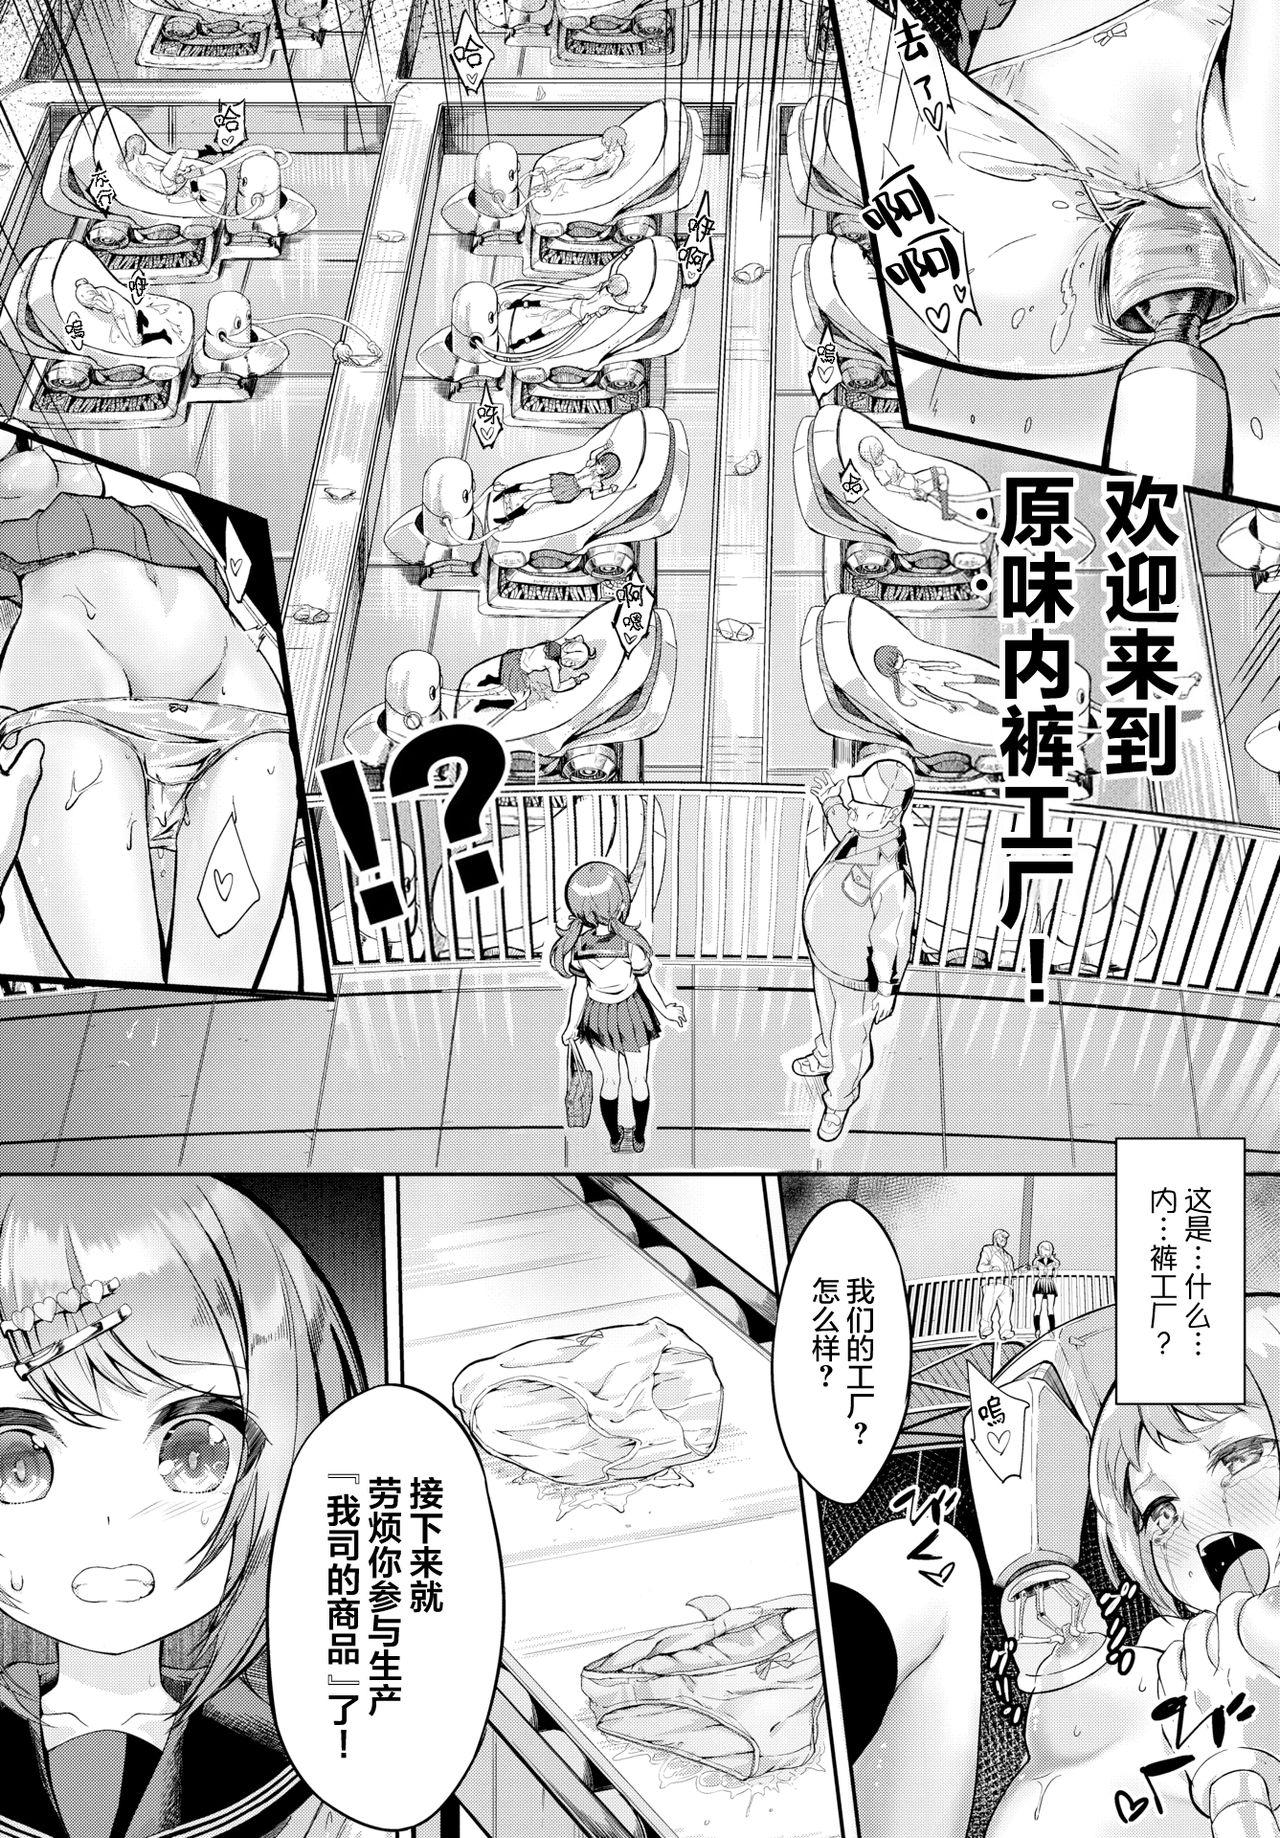 Hot Wife Soreike! Pan Koujou! - Go for it! the Bread factory! Huge Cock - Page 3